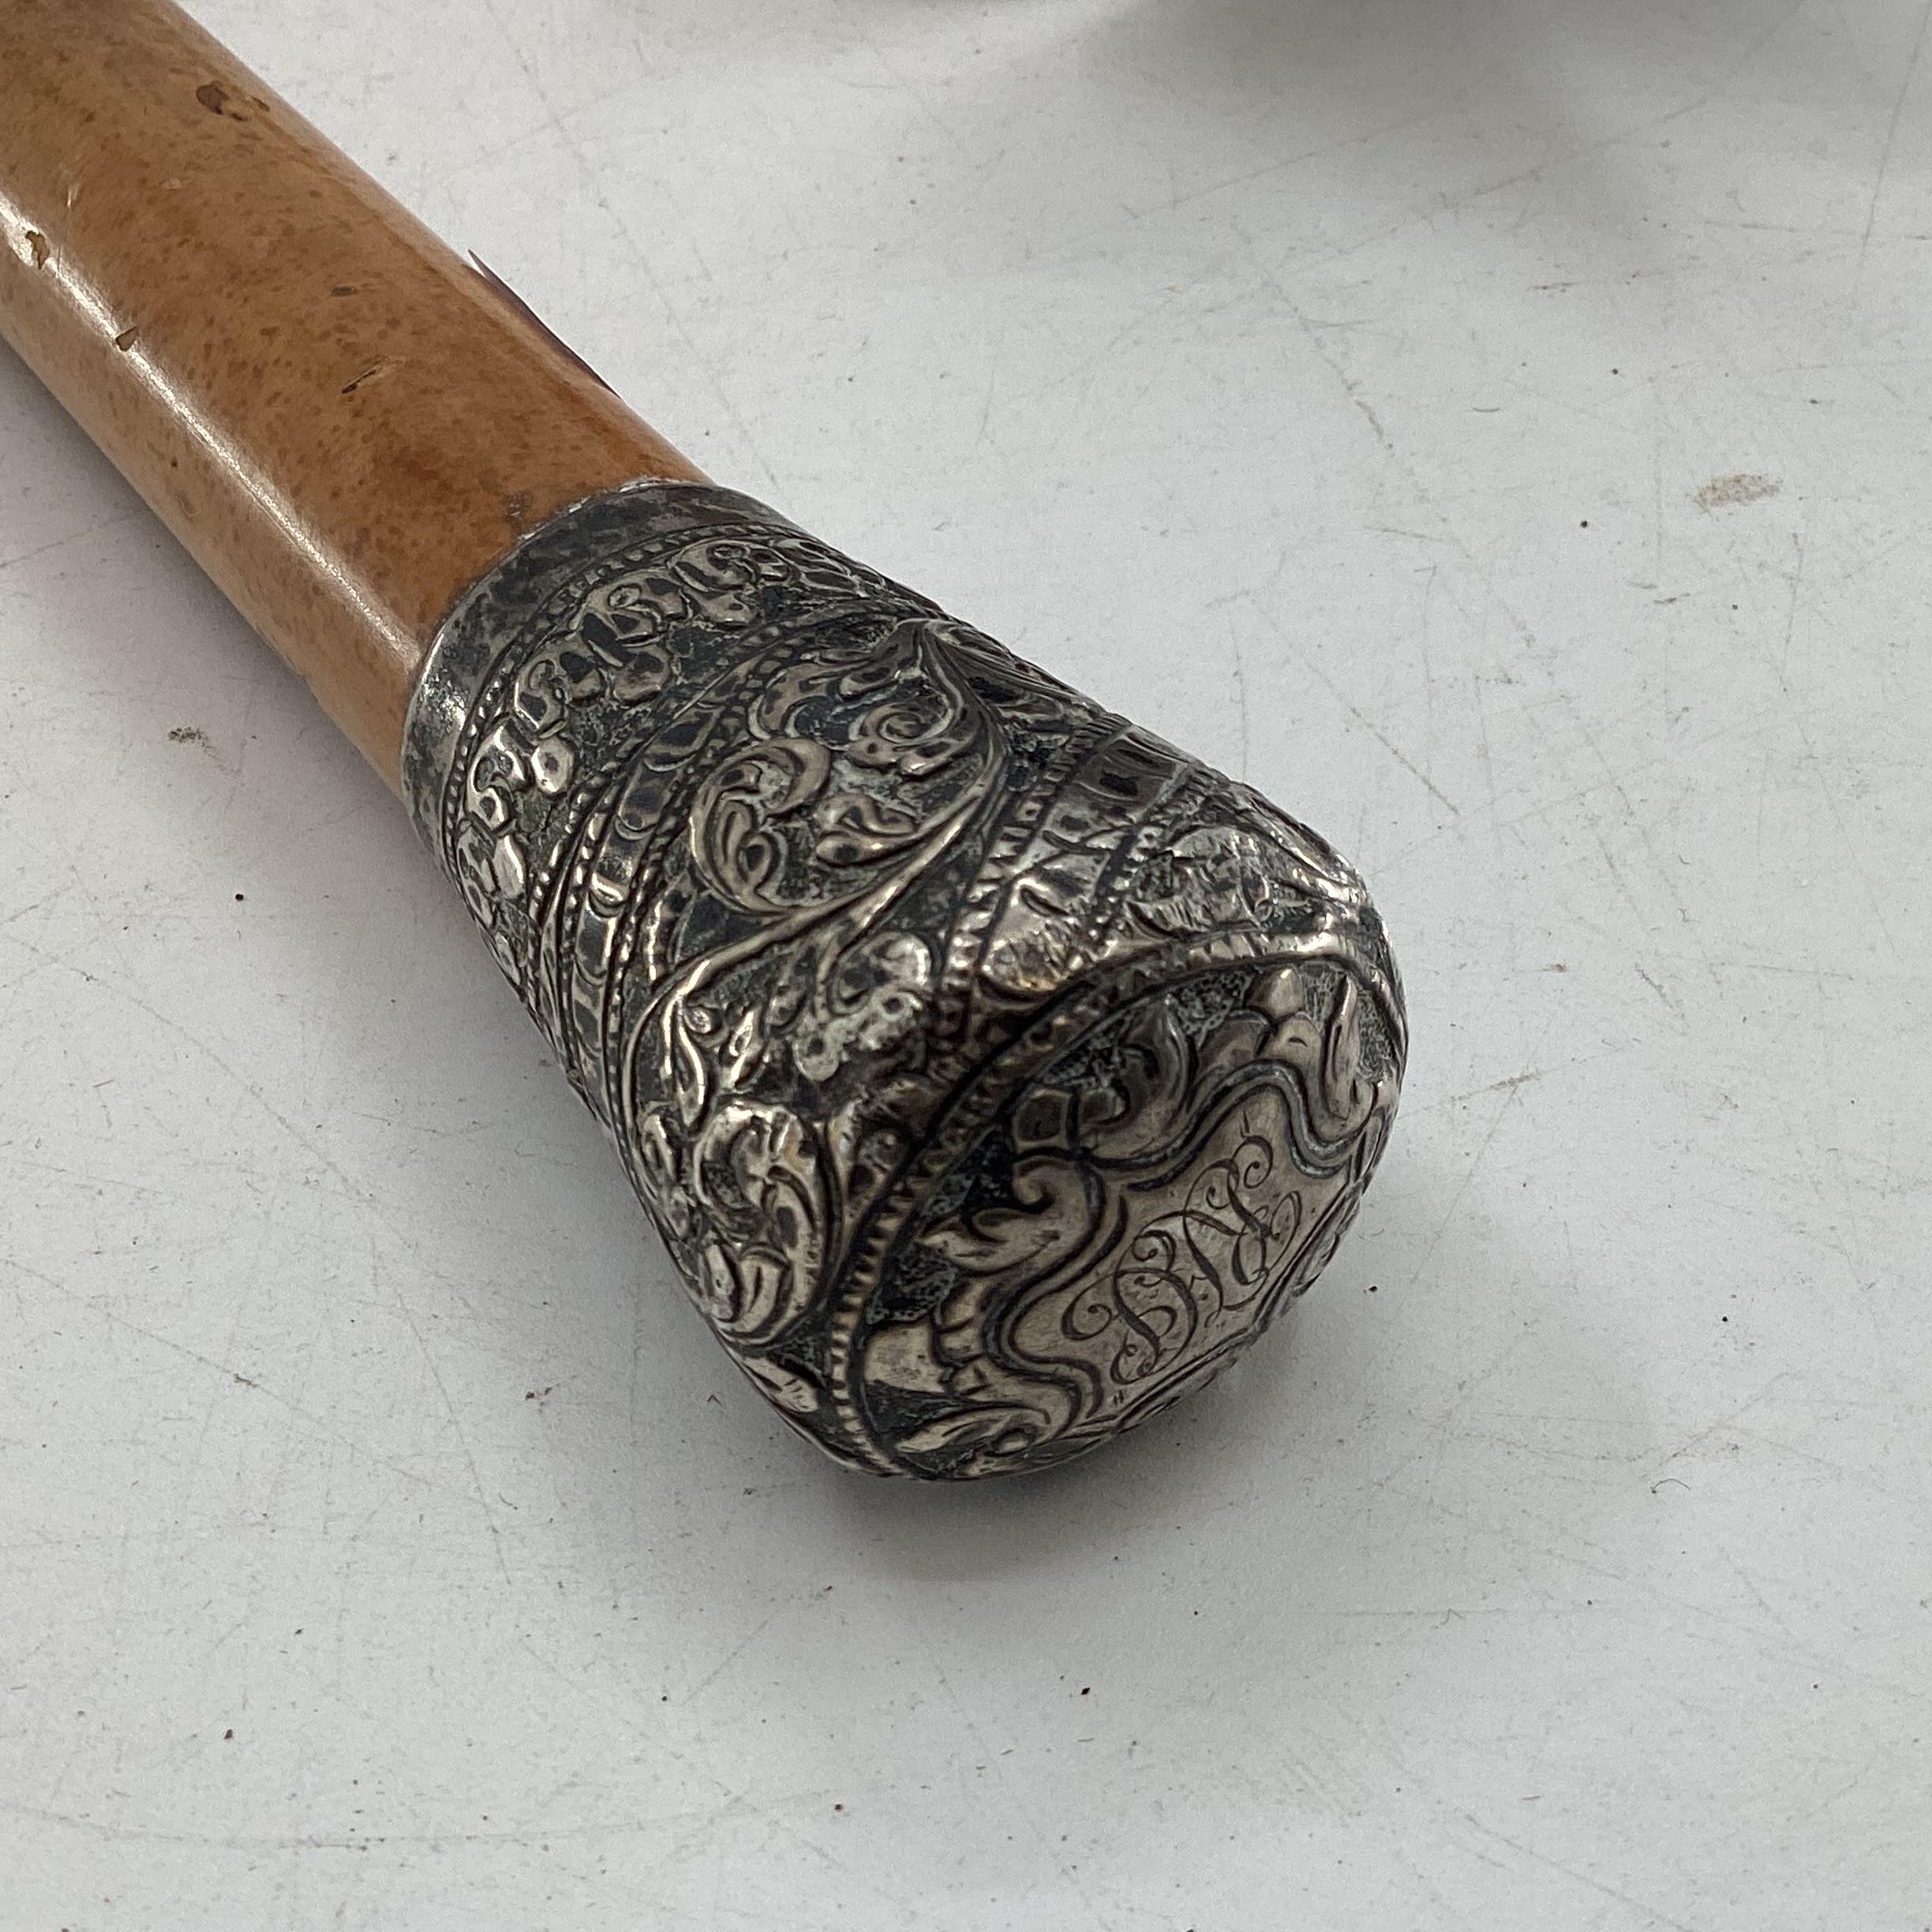 Bamboo shooting stick and a silver topped swagger stick/cane - Image 2 of 4